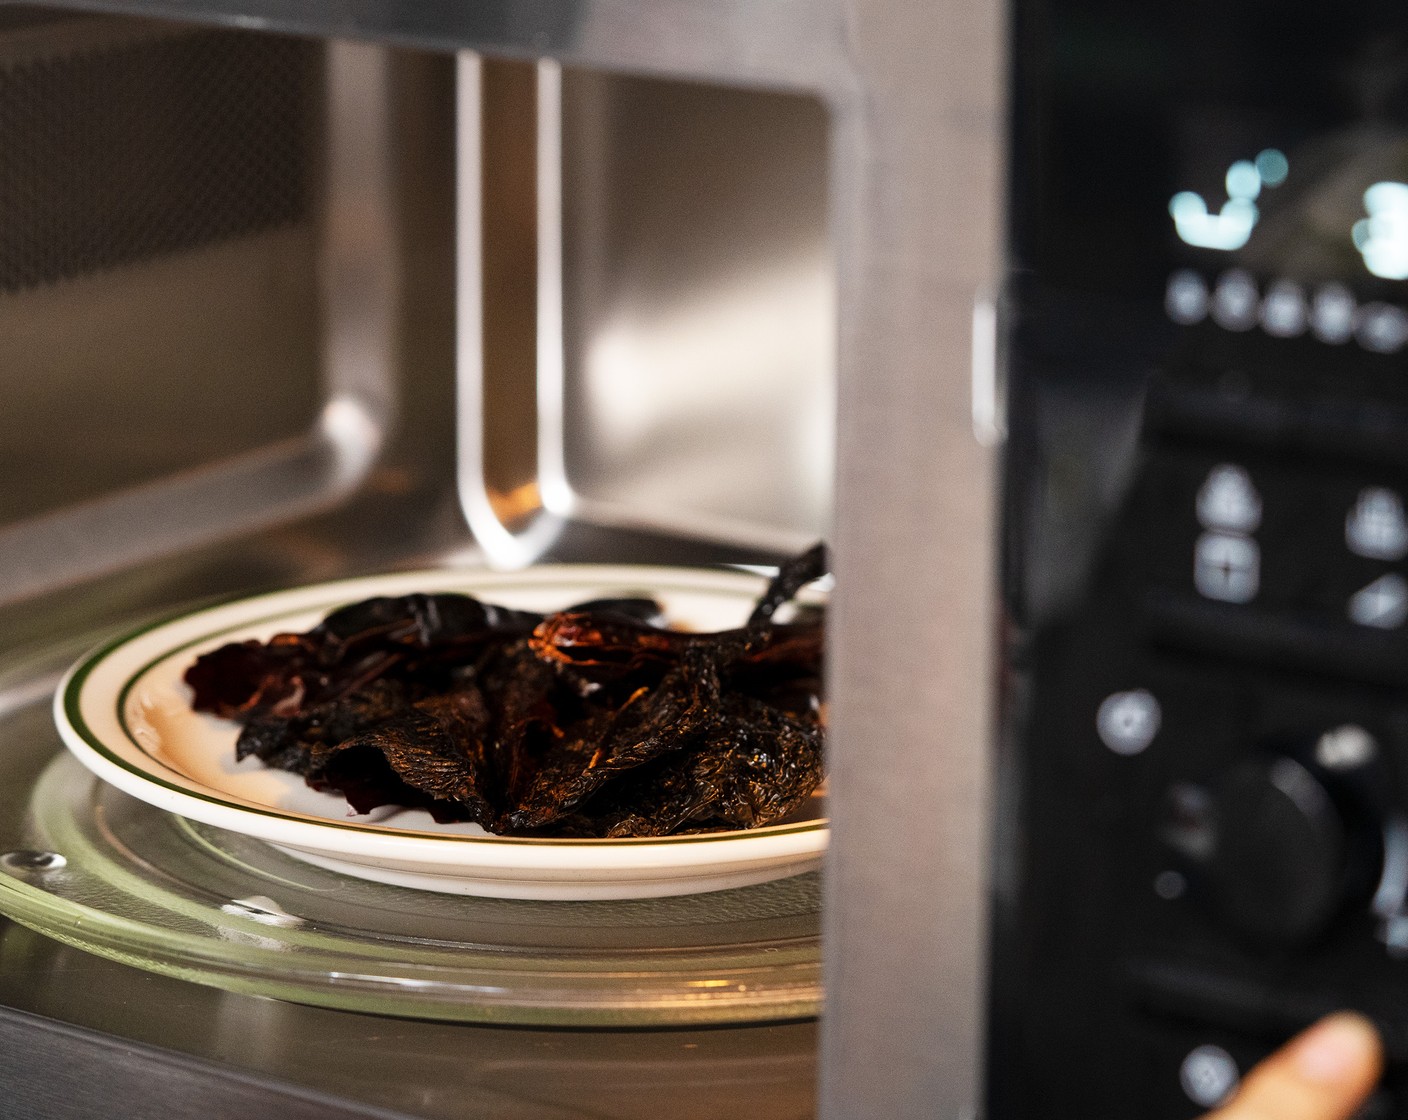 step 2 Place in the microwave at 15 second intervals until toasted and tender. It should take around 30 seconds.